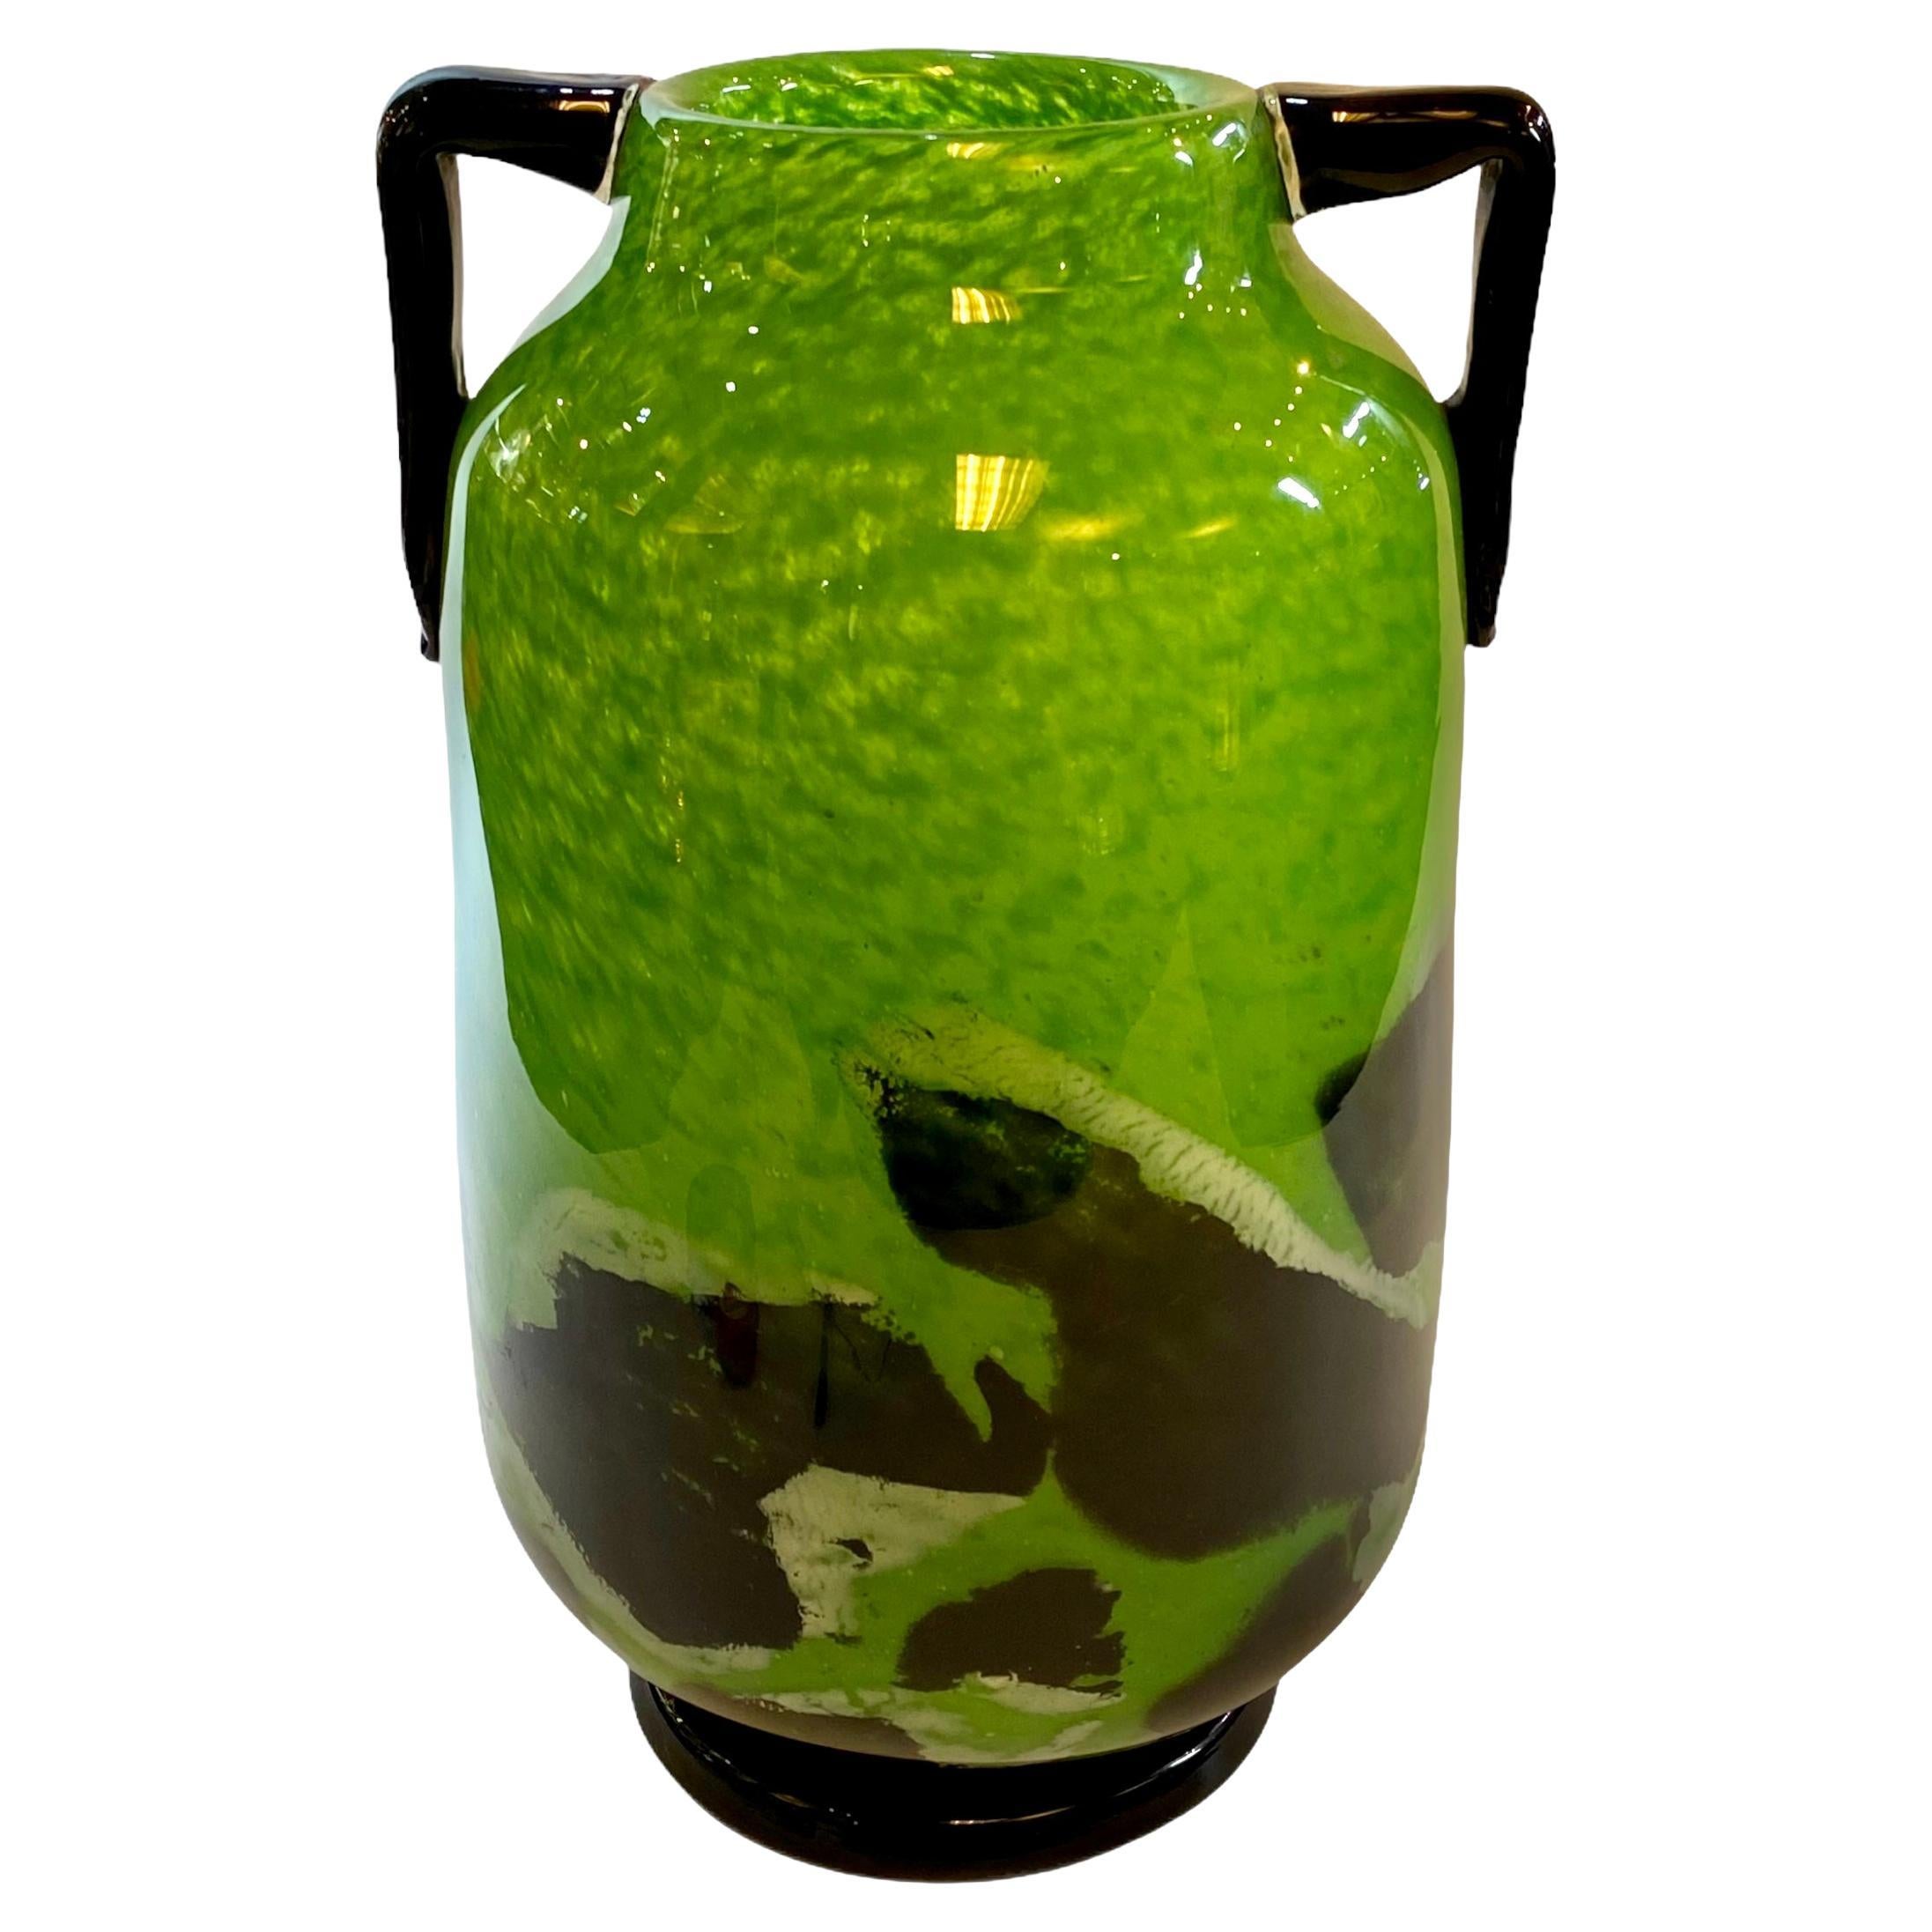 Our French Art Deco period vase from Degue in mottled green and black glass with applied handles measures 16 1/4 in, 41.3 cm tall.  It is in very good condition with light scratches and scuffs.  Engraved on underside in script 